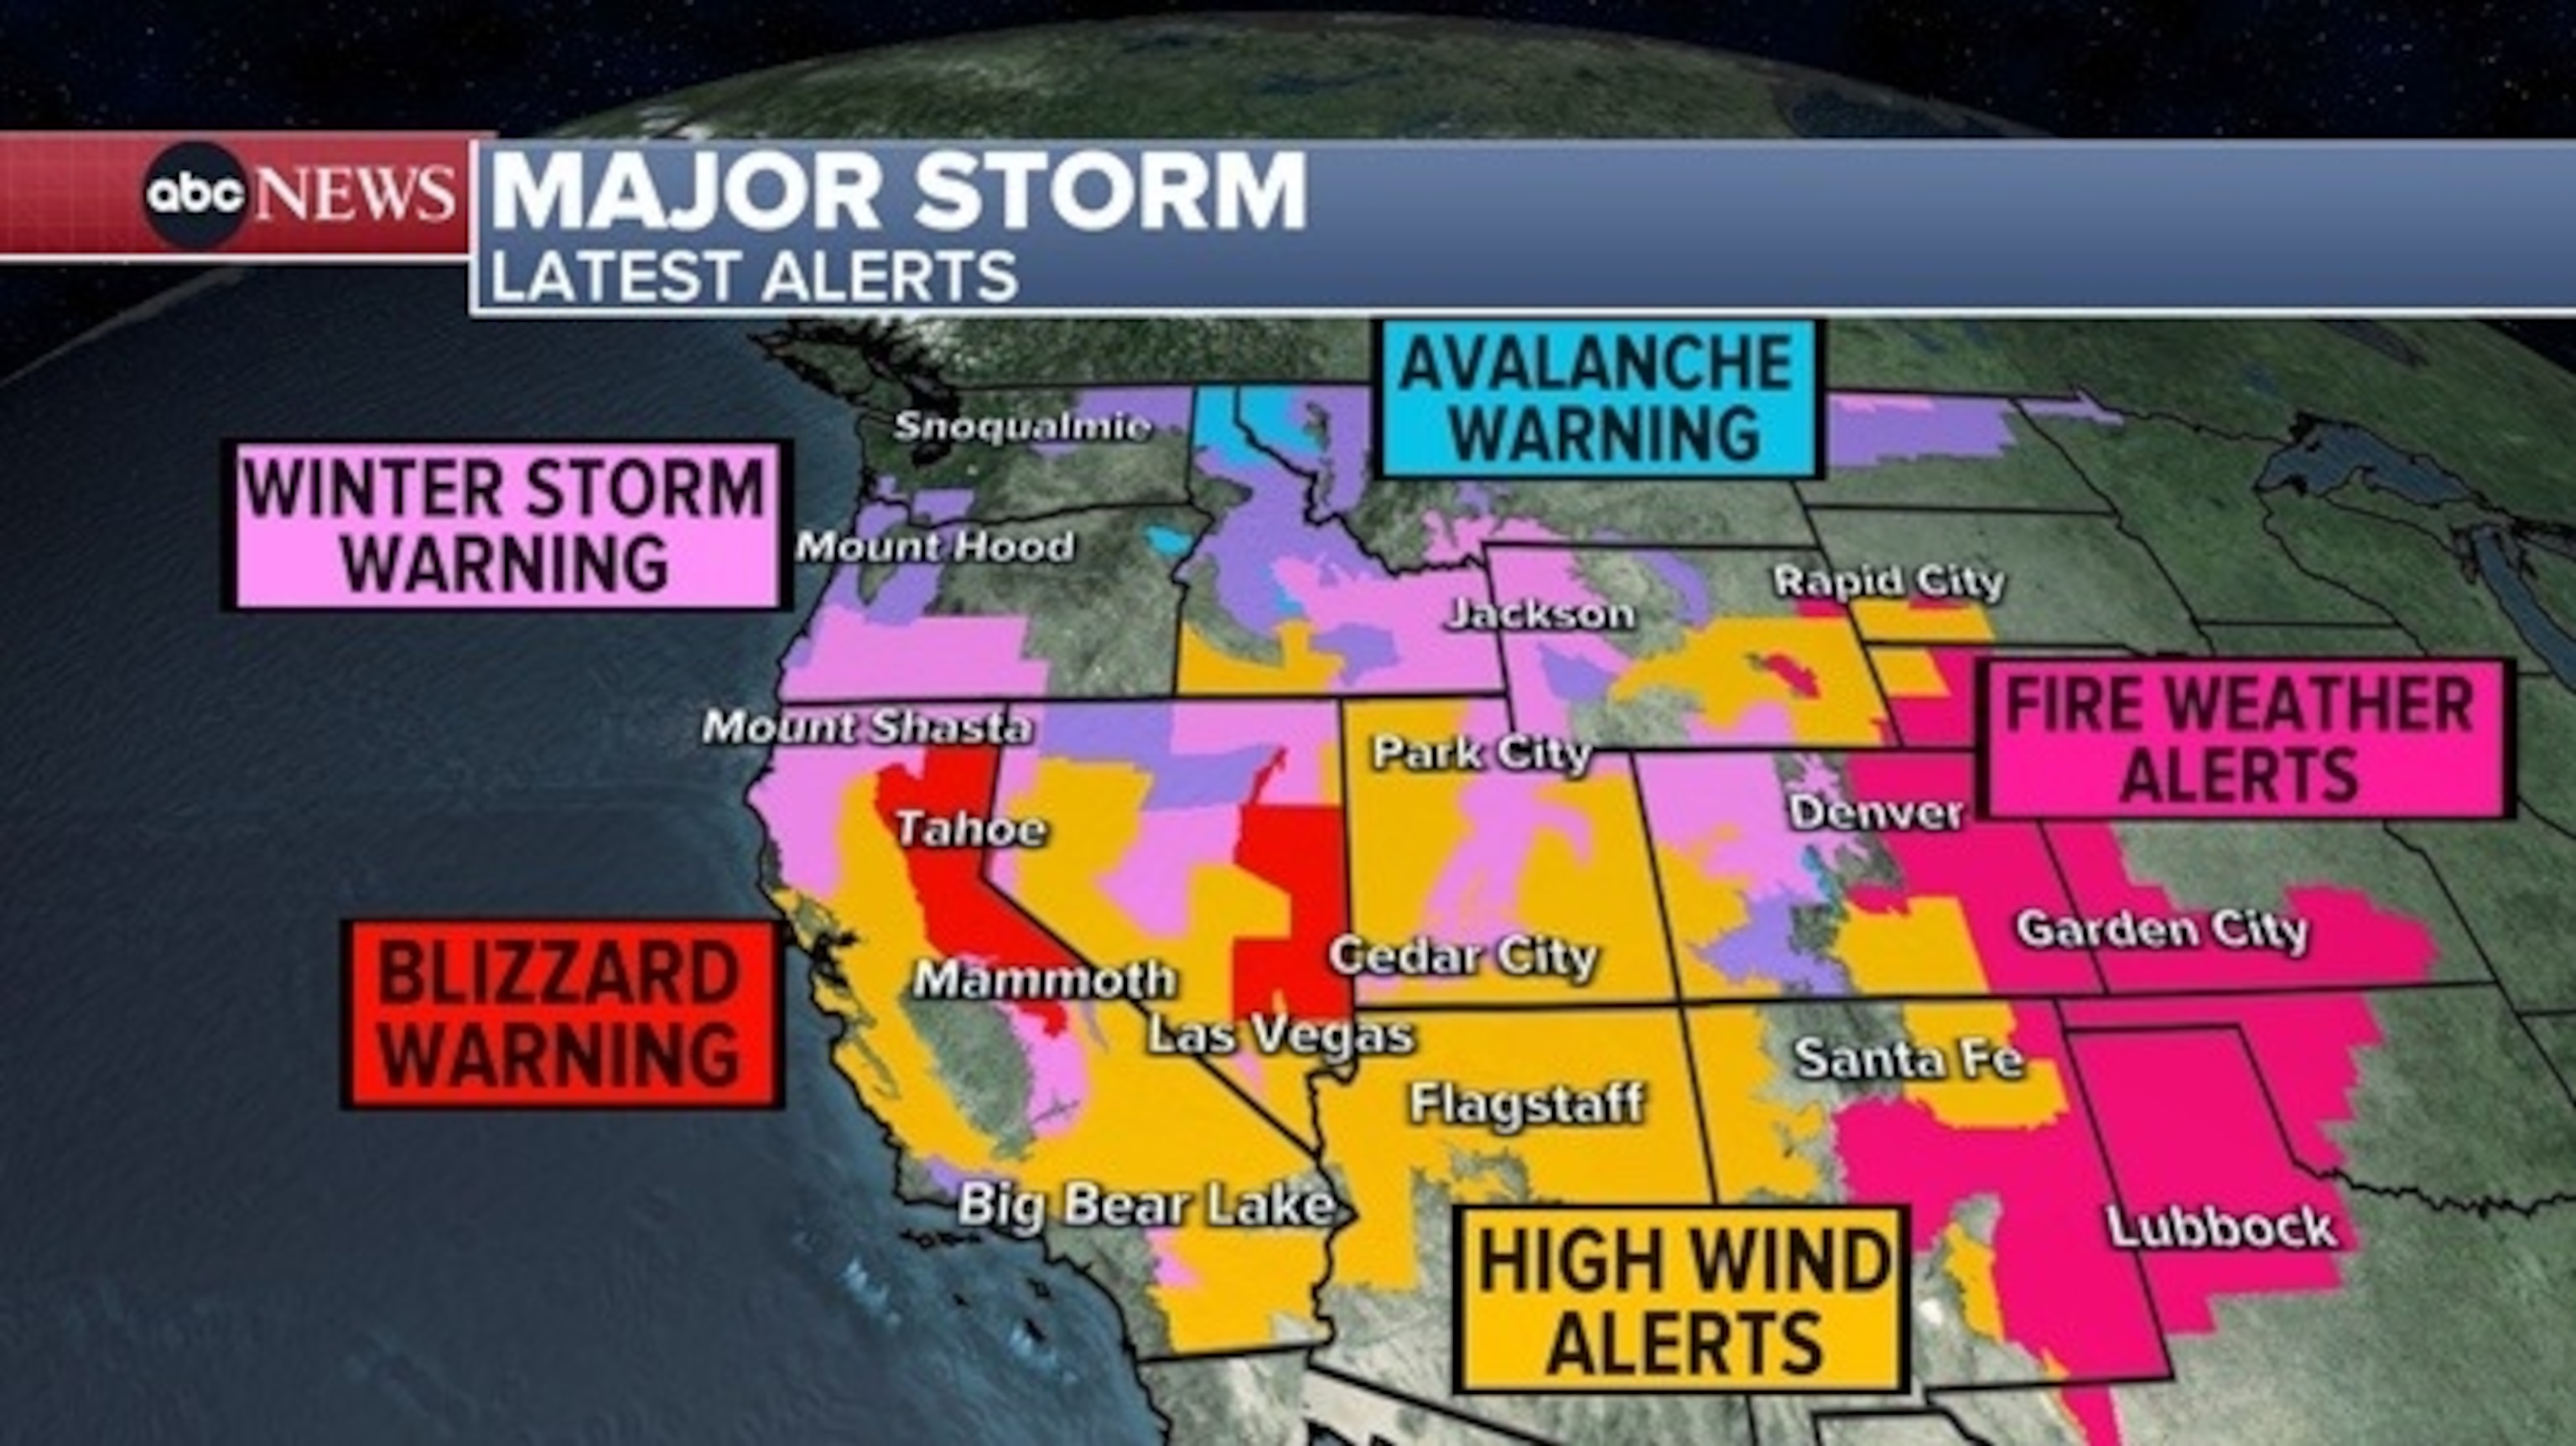 PHOTO: Nine states in the west have winter alerts in effect due to this storm bringing heavy snow and gusty winds.